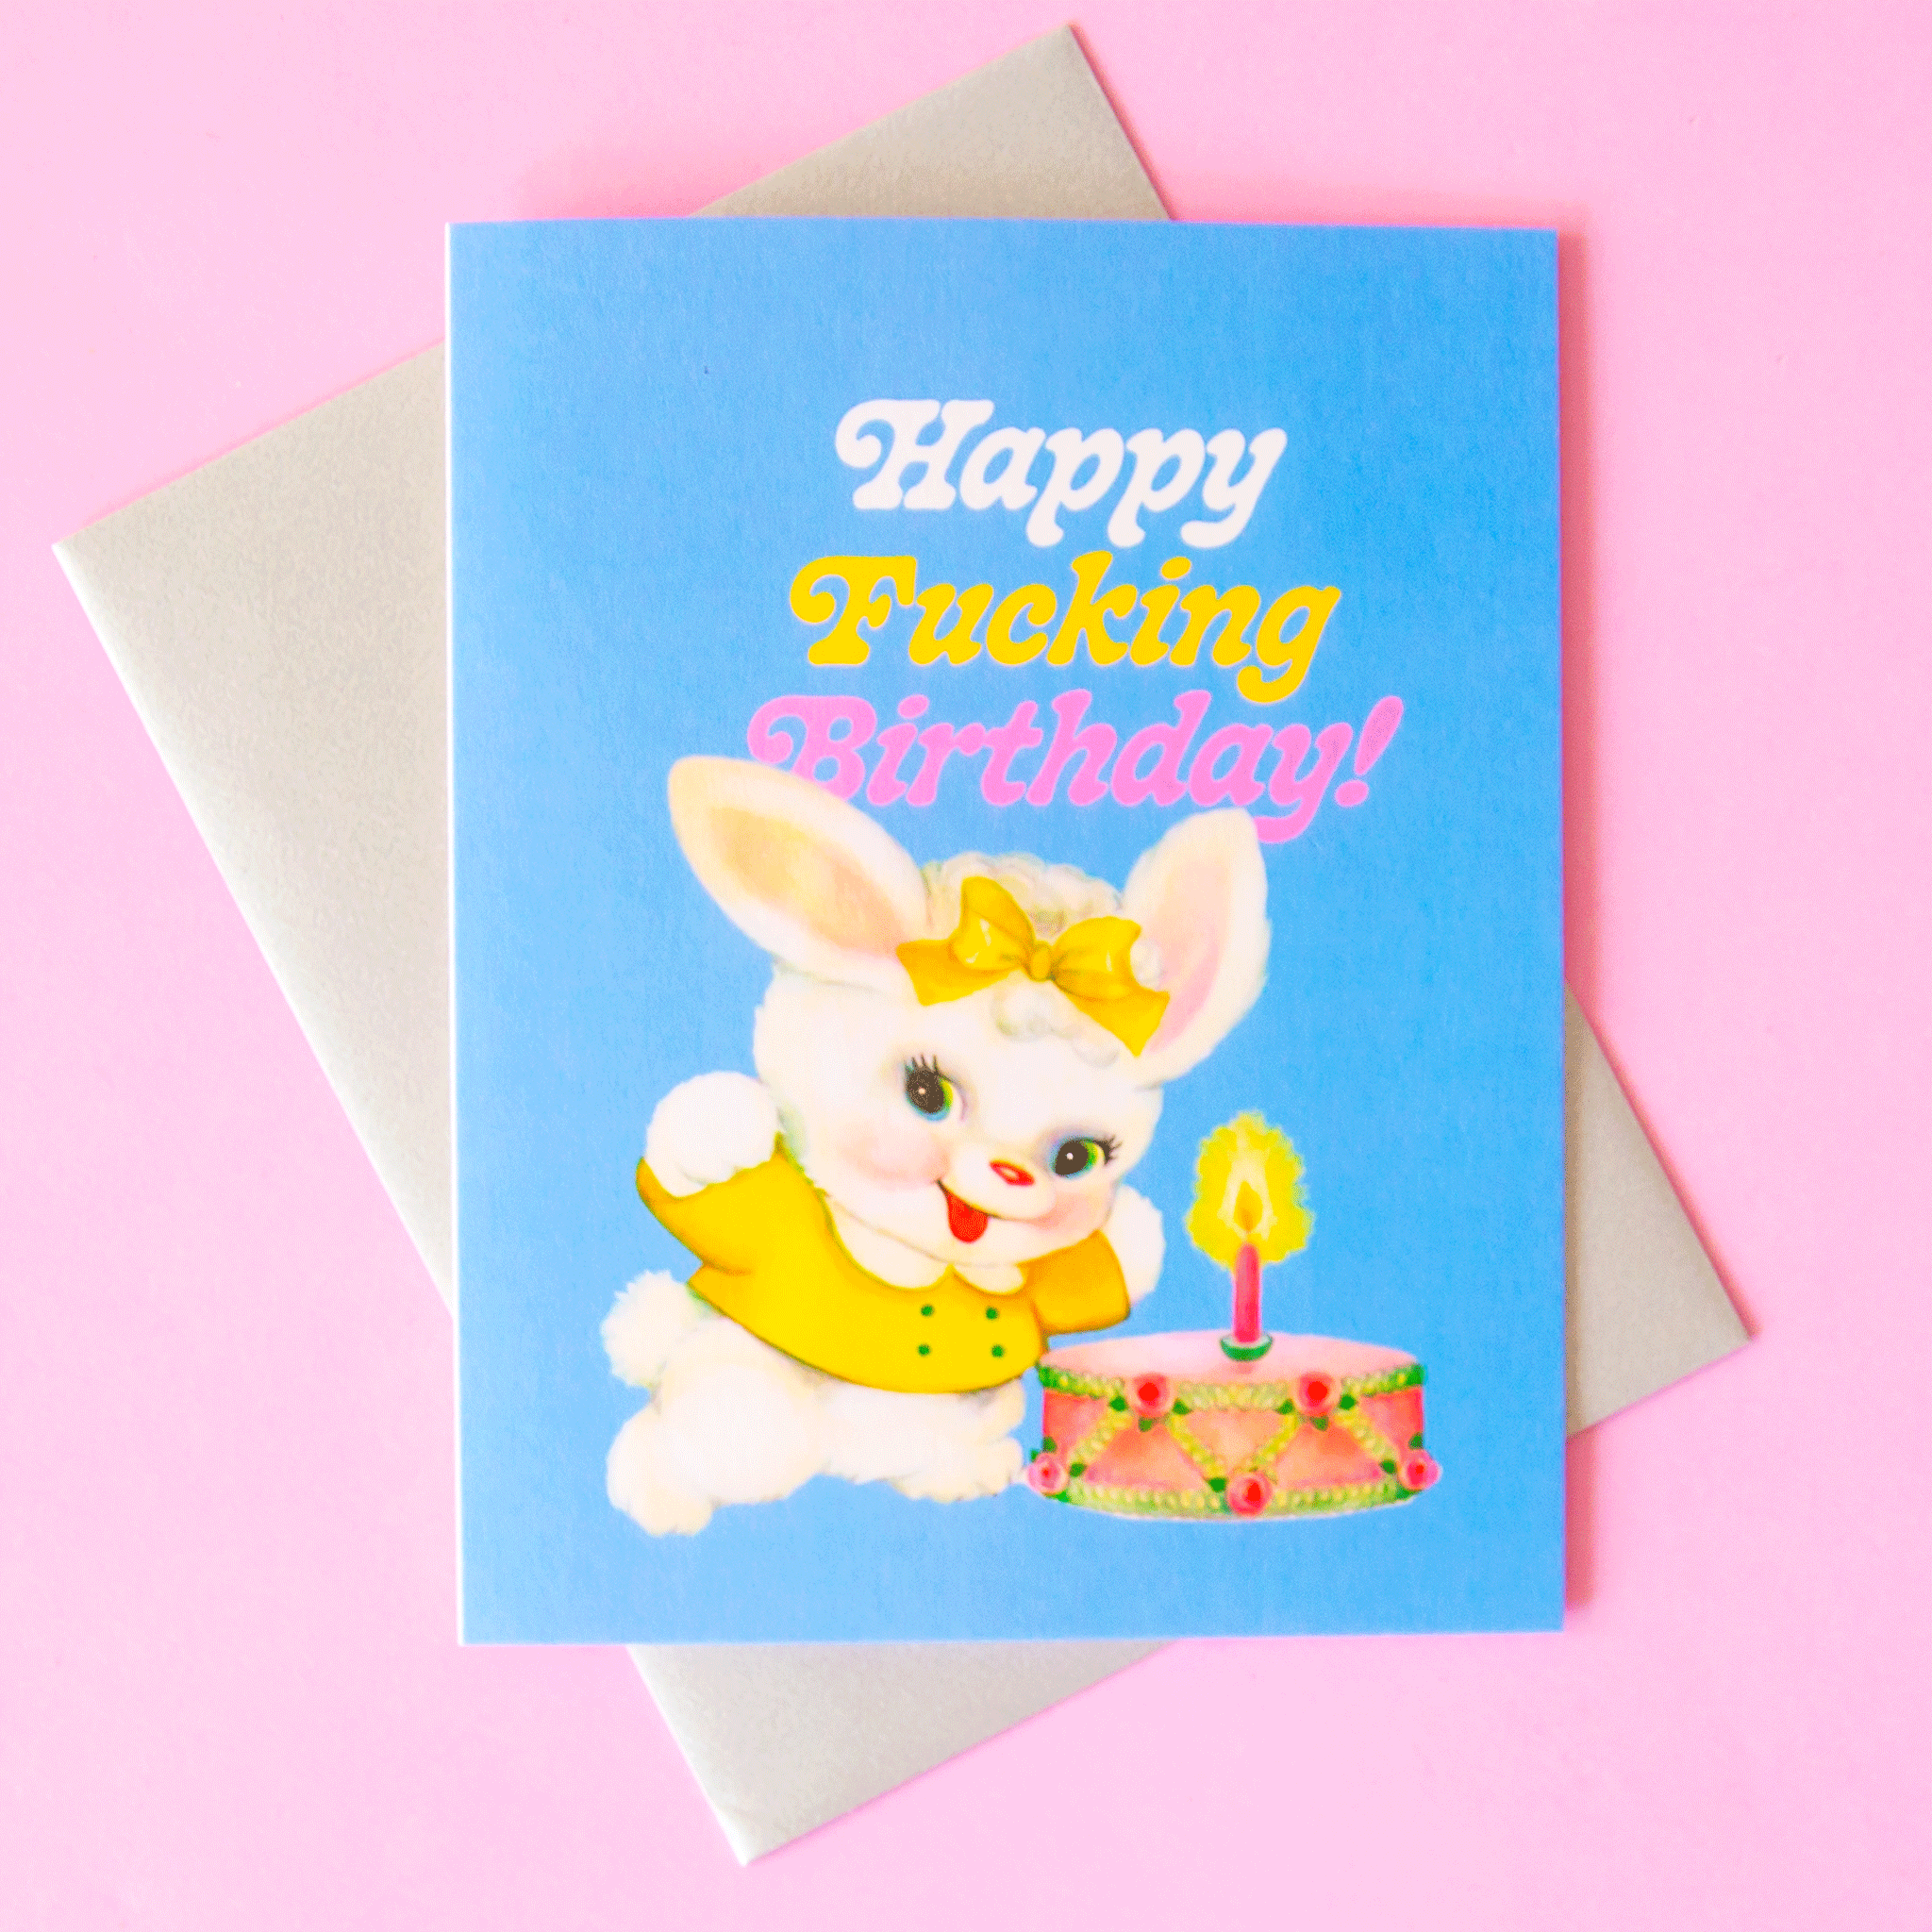 On a pink background is a blue card with text that reads, "Happy Fucking Birthday!" along with a graphic of a white fluffy bunny with a yellow shirt and bow standing next to a vintage birthday cake. 